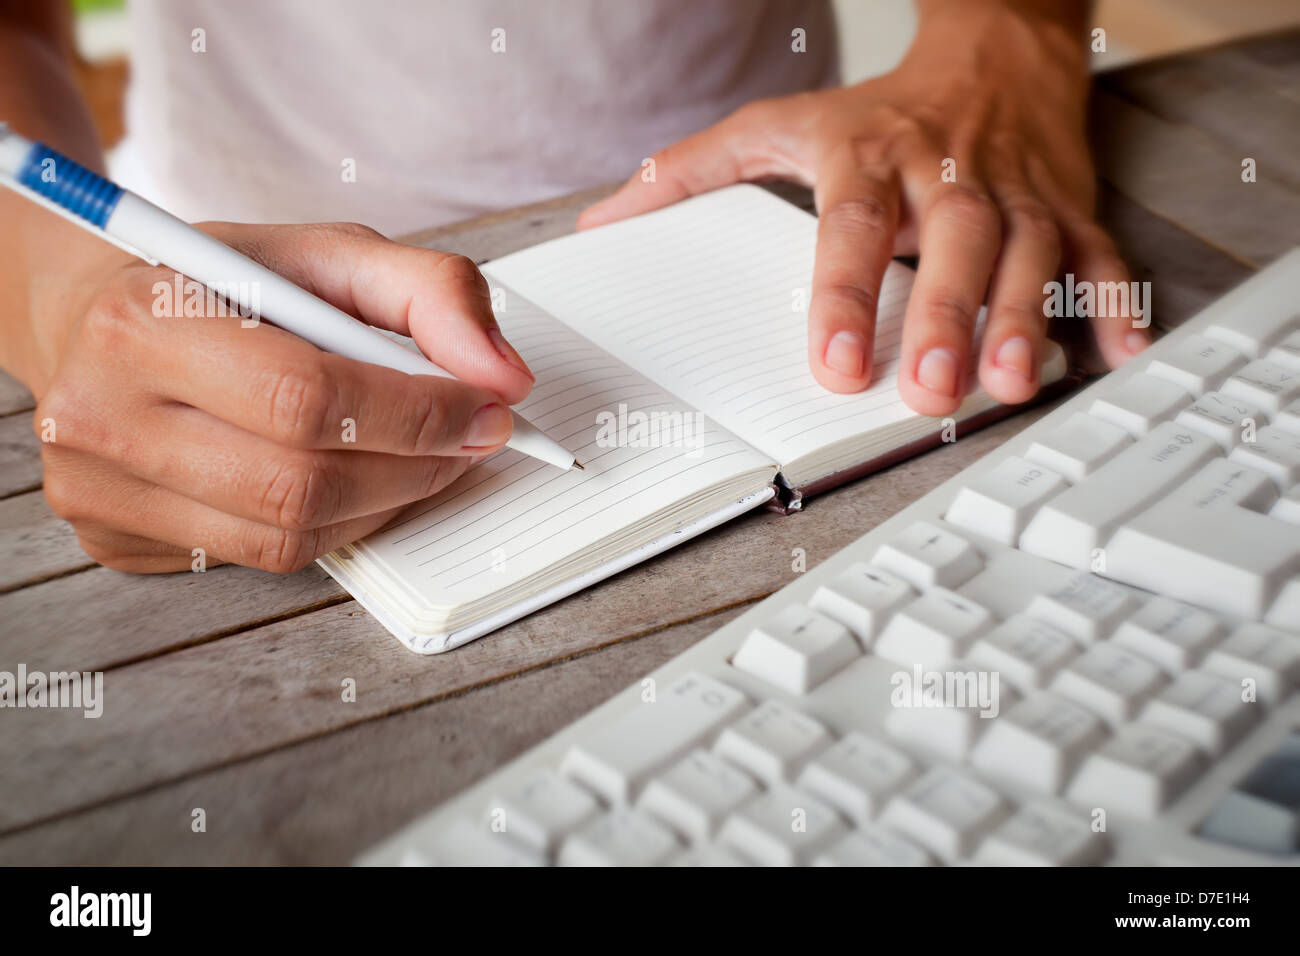 Photo of hands writes a pen in a notebook, computer keyboard on foreground Stock Photo